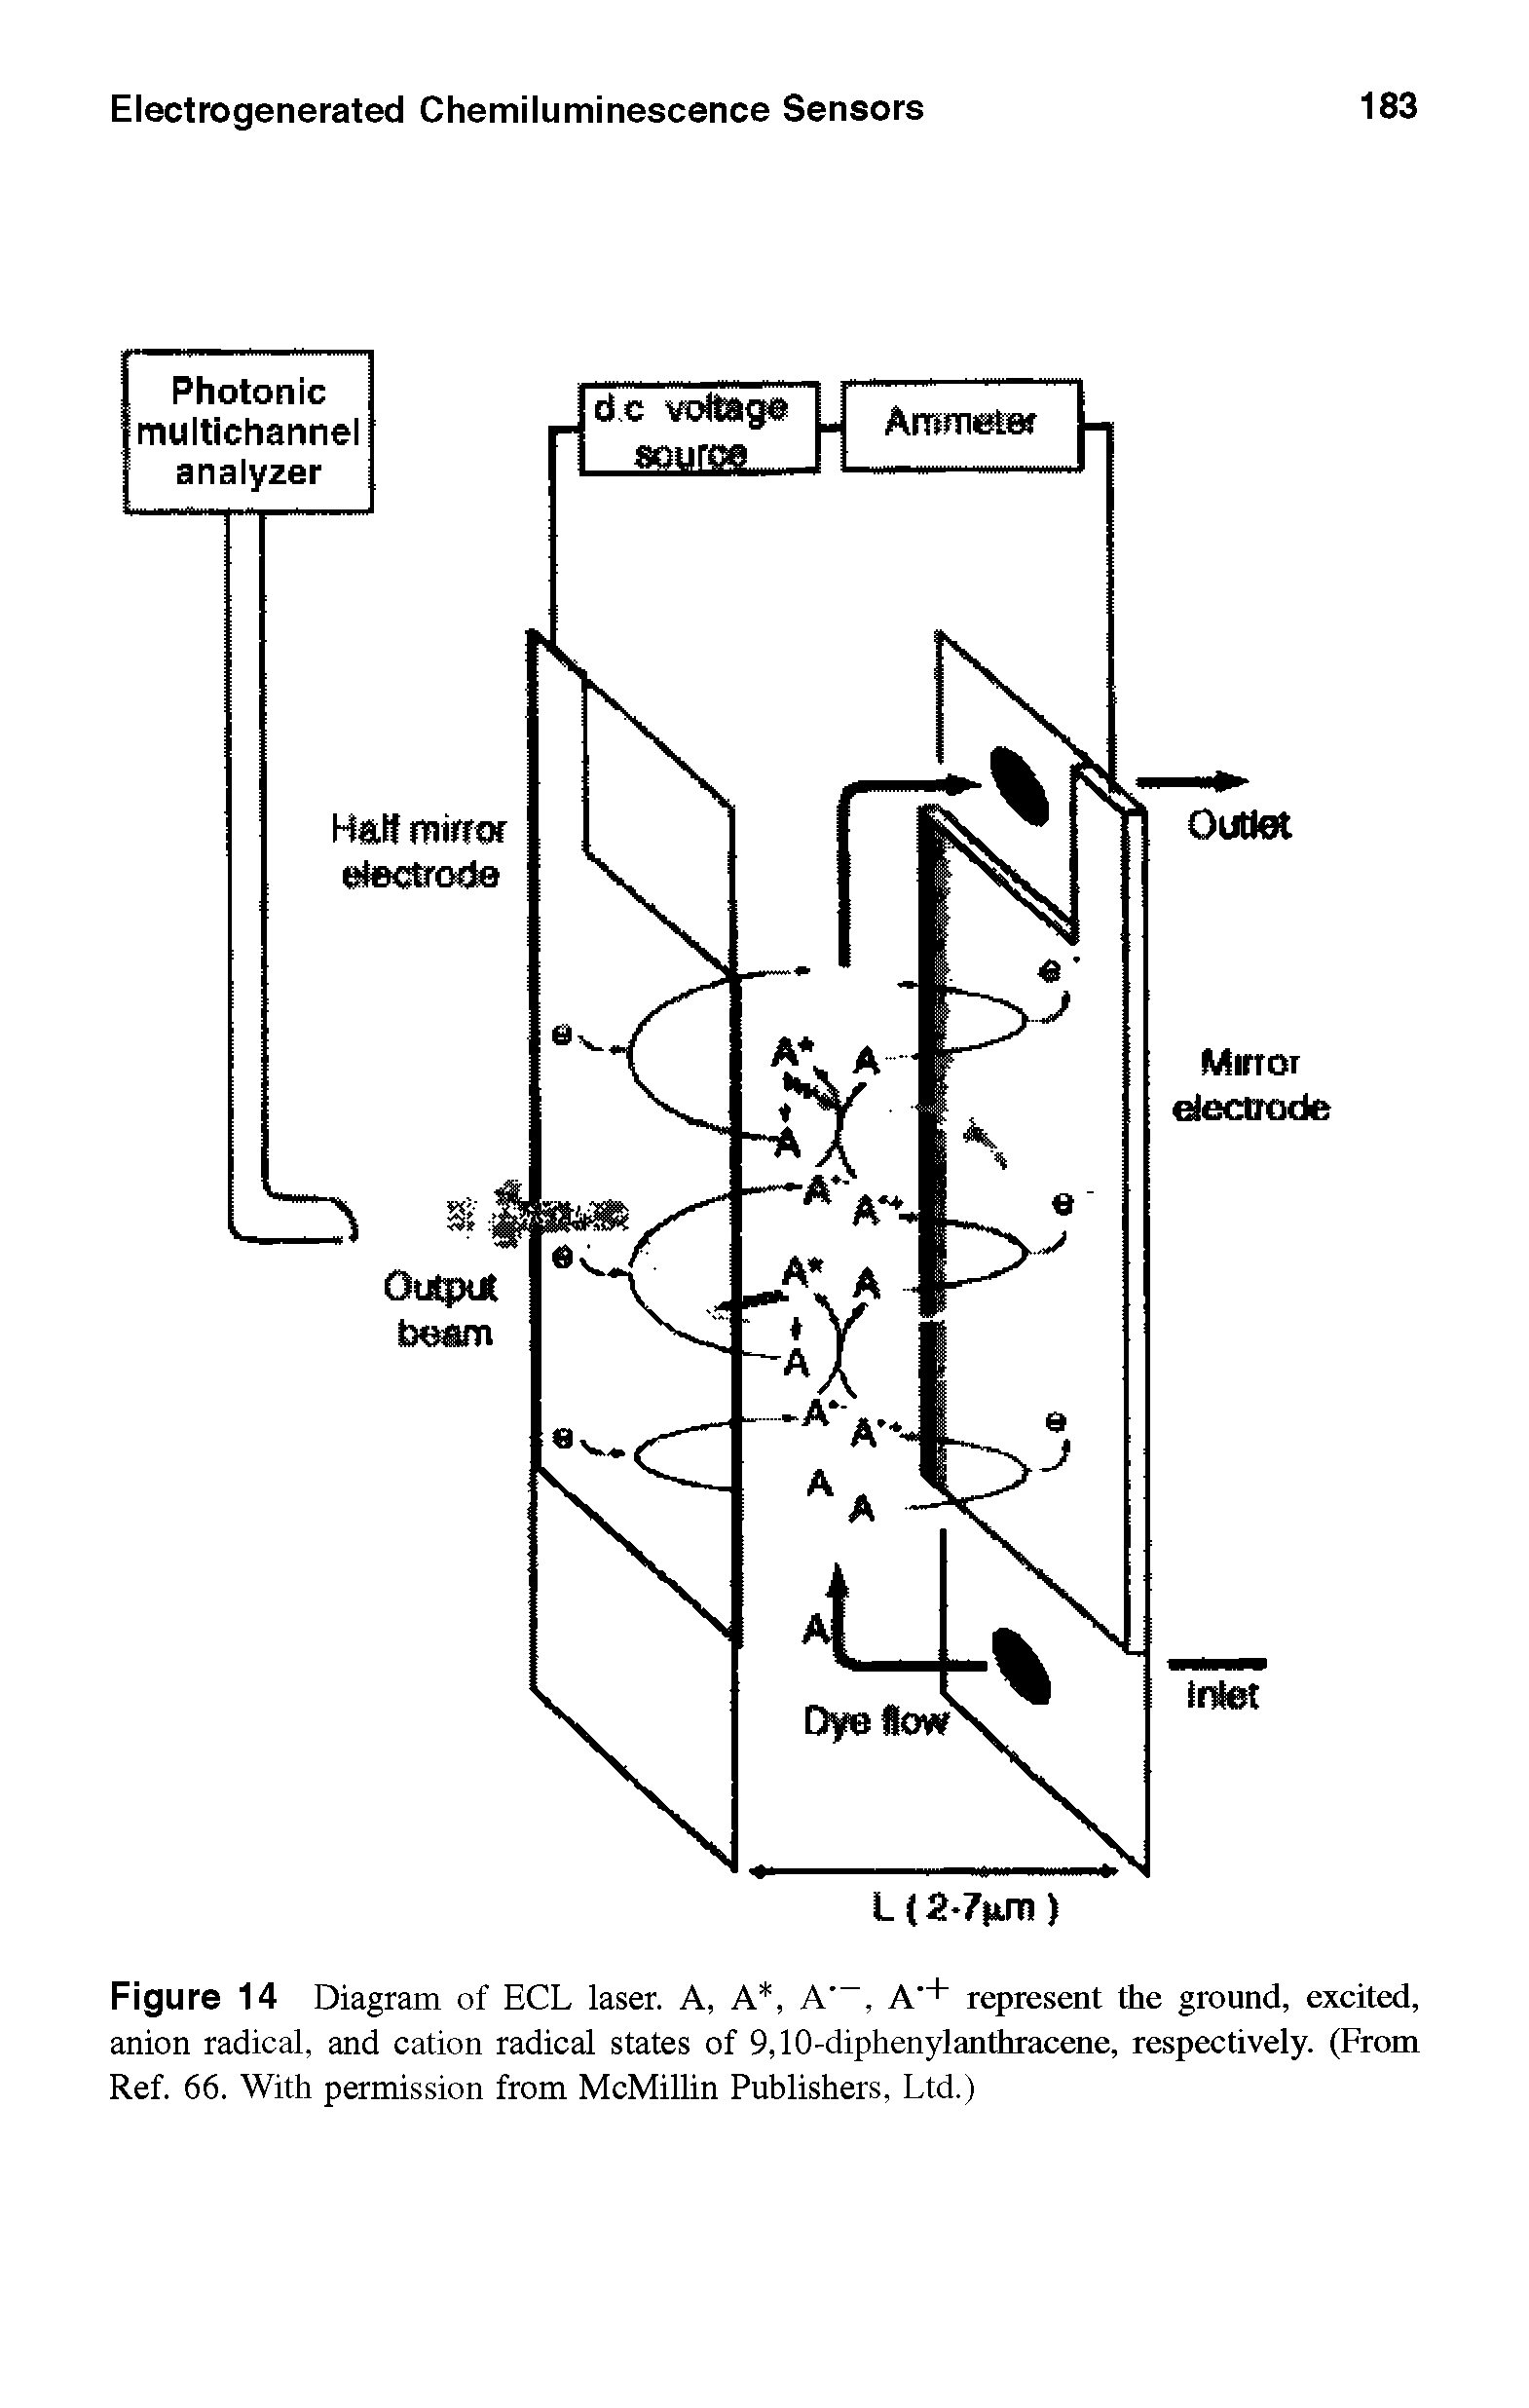 Figure 14 Diagram of ECL laser. A, A, A, A + represent the ground, excited, anion radical, and cation radical states of 9,10-diphenylanthracene, respectively. (From Ref. 66. With permission from McMillin Publishers, Ltd.)...